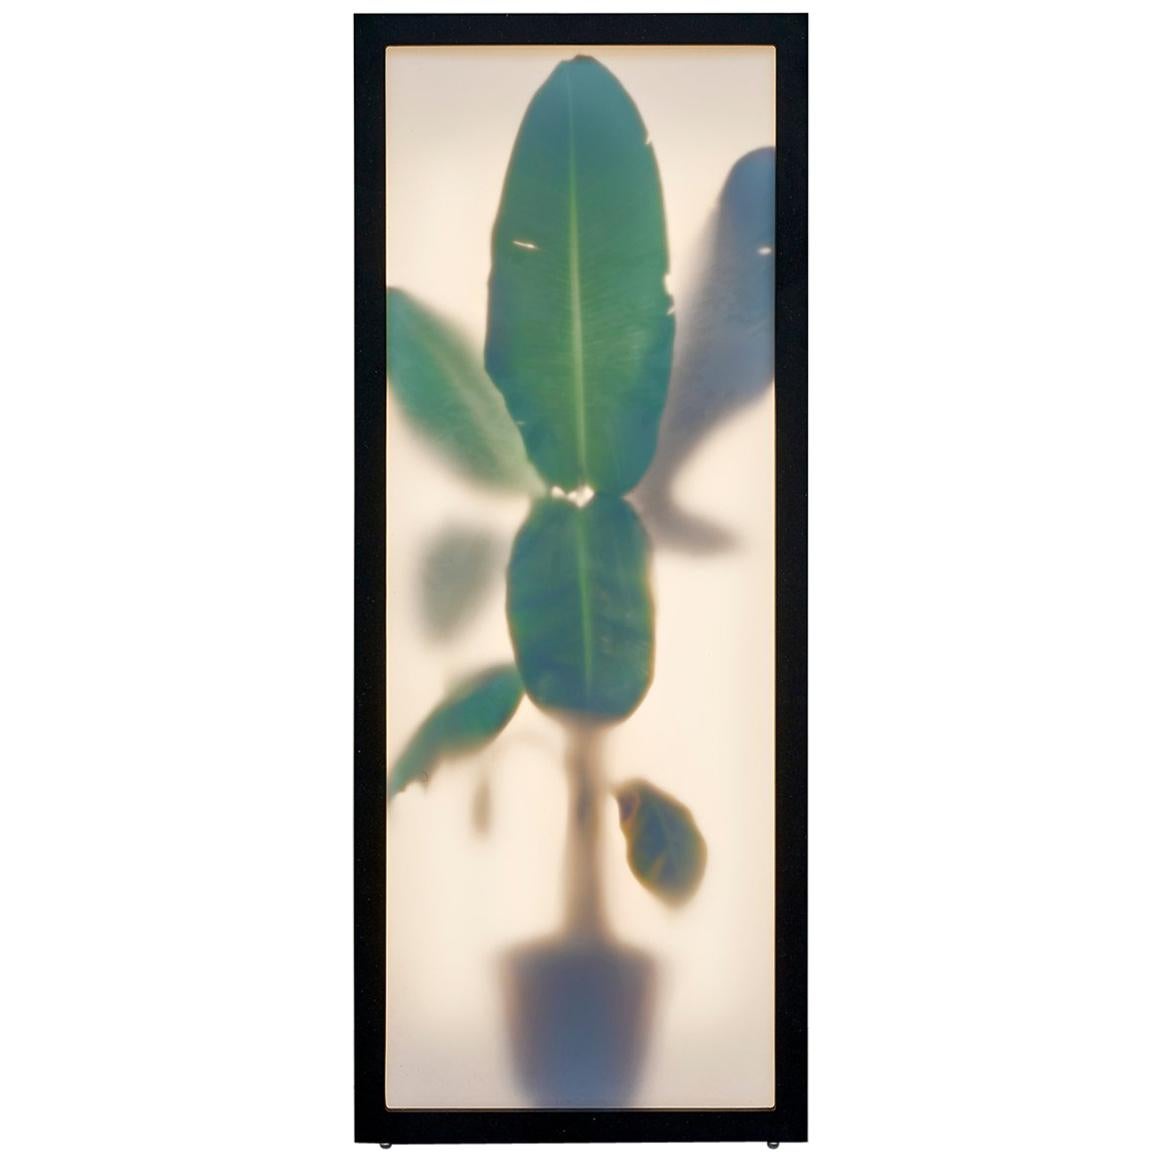 REM Atelier, Growing Plants Indoors, Light Box with Photographic Collage, 2018 For Sale